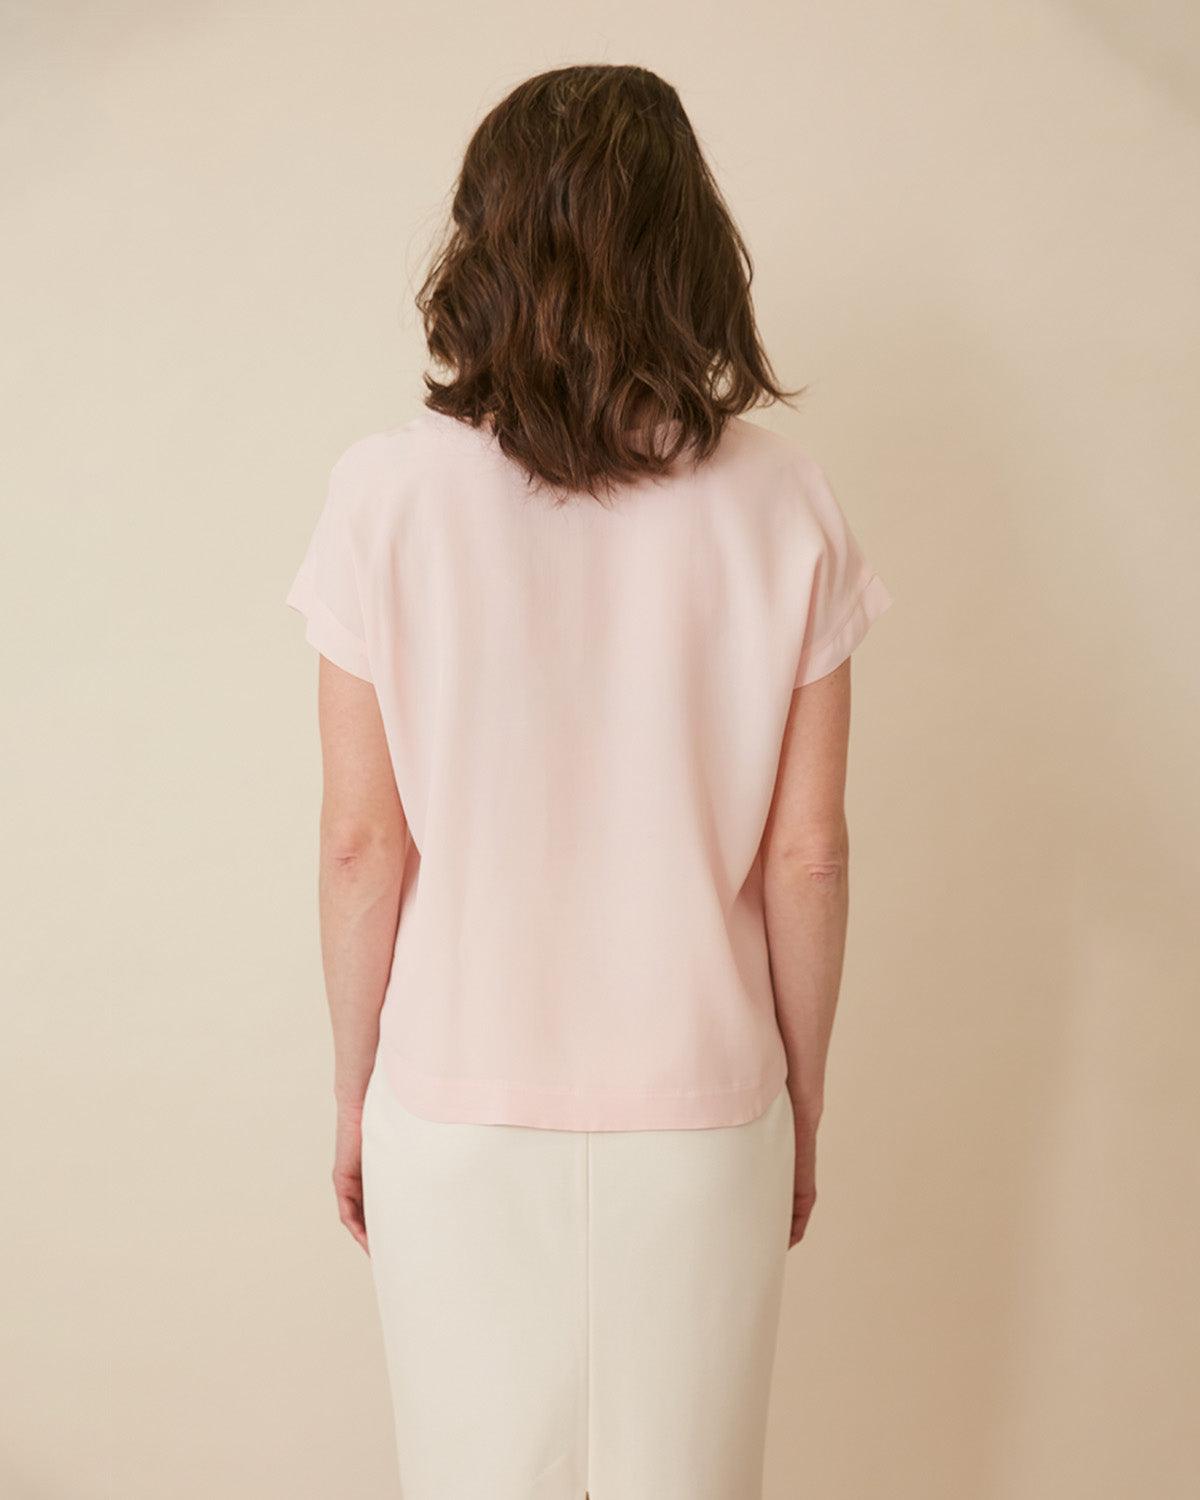 "#color_BLUSH PINK|Jessica is 5'10", wearing a size S